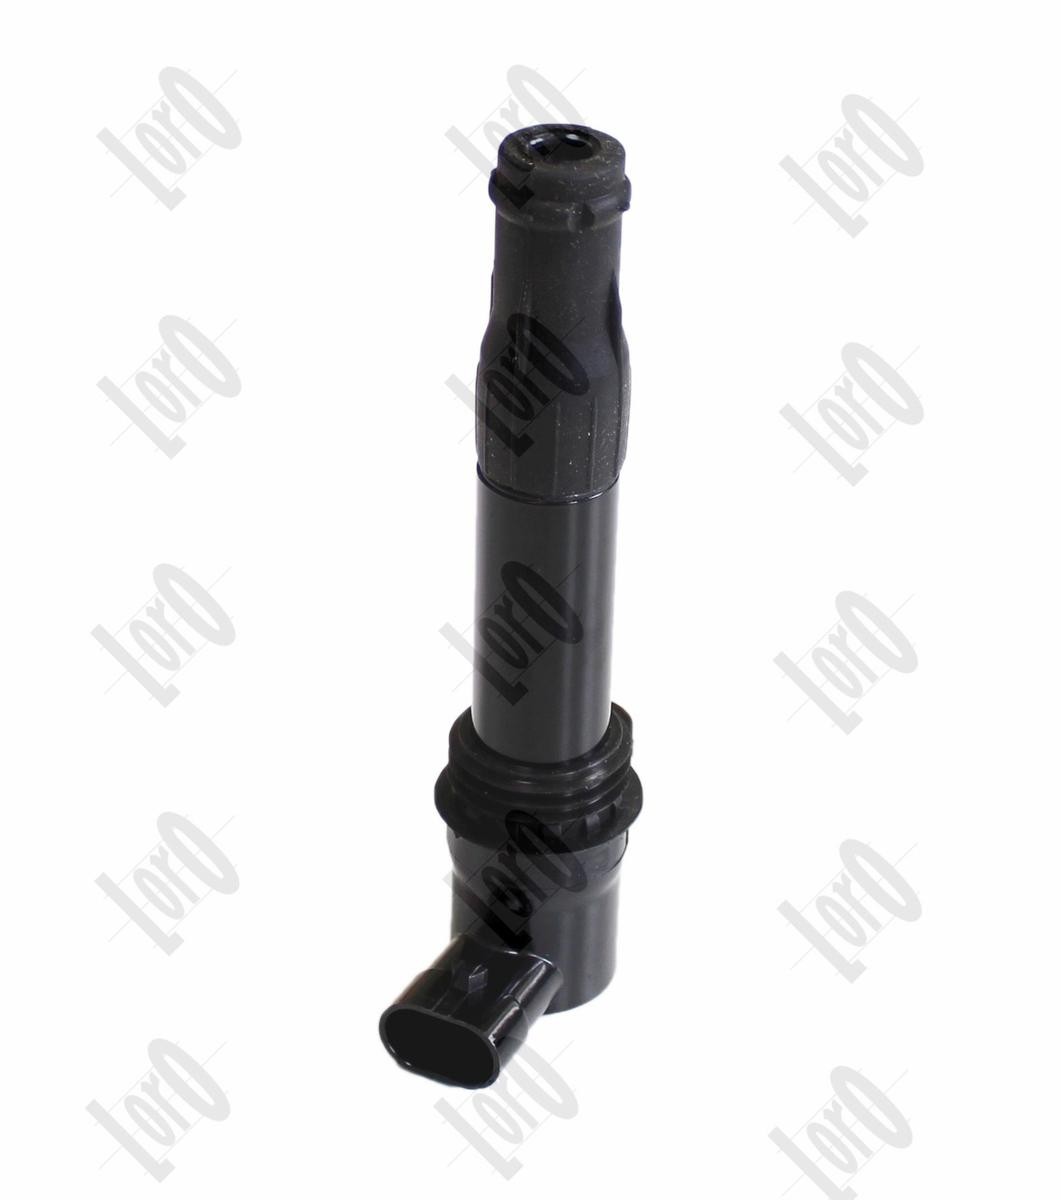 ABAKUS 1, 3-pin connector, Connector Type SAE Number of pins: 1, 3-pin connector Coil pack 122-01-119 buy